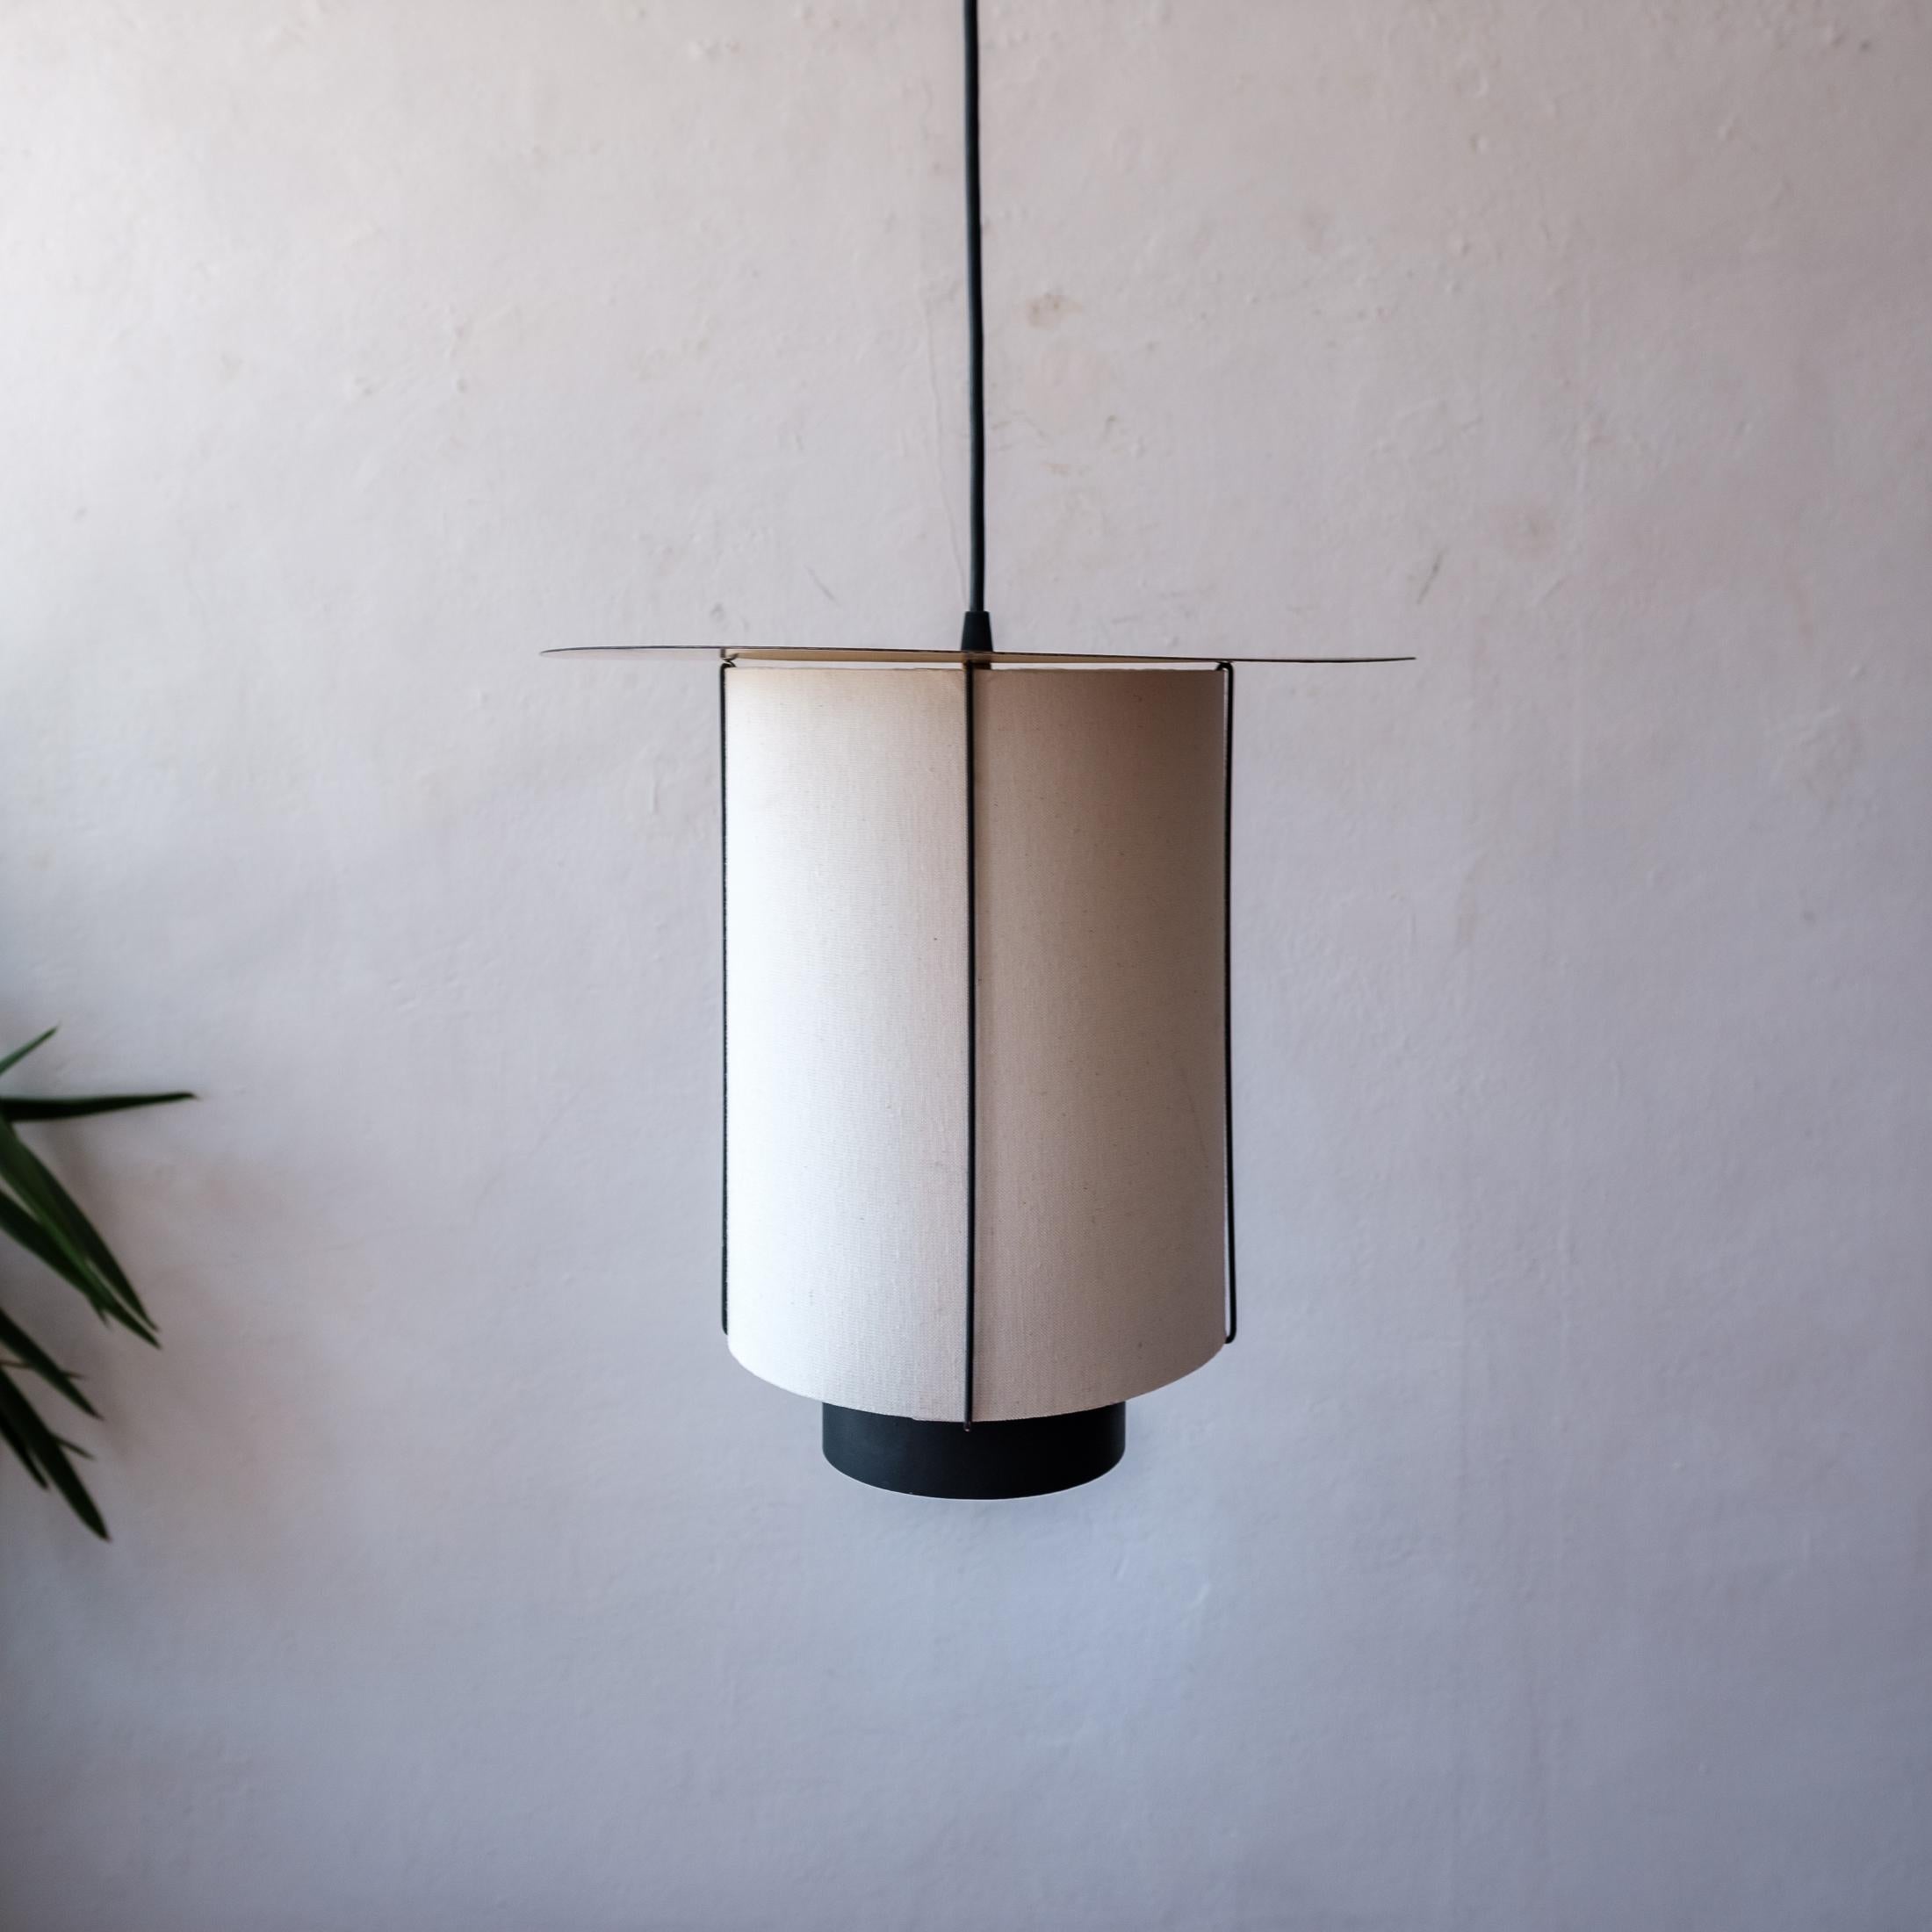 Midcentury hanging lamp by Paul Mayen for Habitat Associates. Selected and shown at the 1953 Museum of Modern Art Good Design exhibition. Enameled metal frame and reflector with a linen shade. Pull switch.